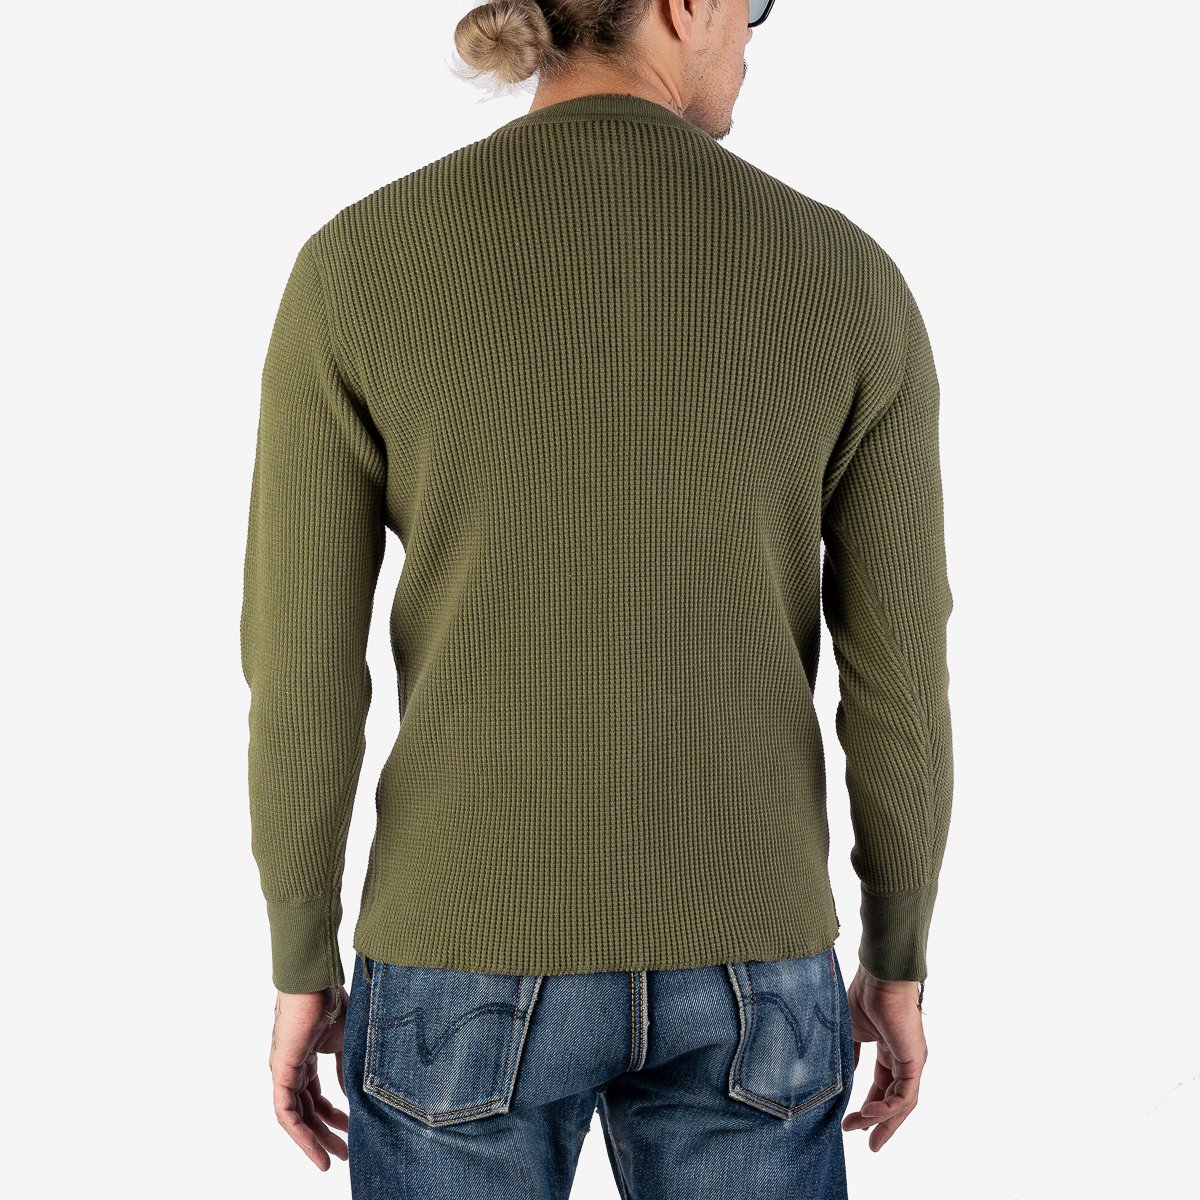 Iron Heart Thermal Waffle Knit Long Sleeved Henley